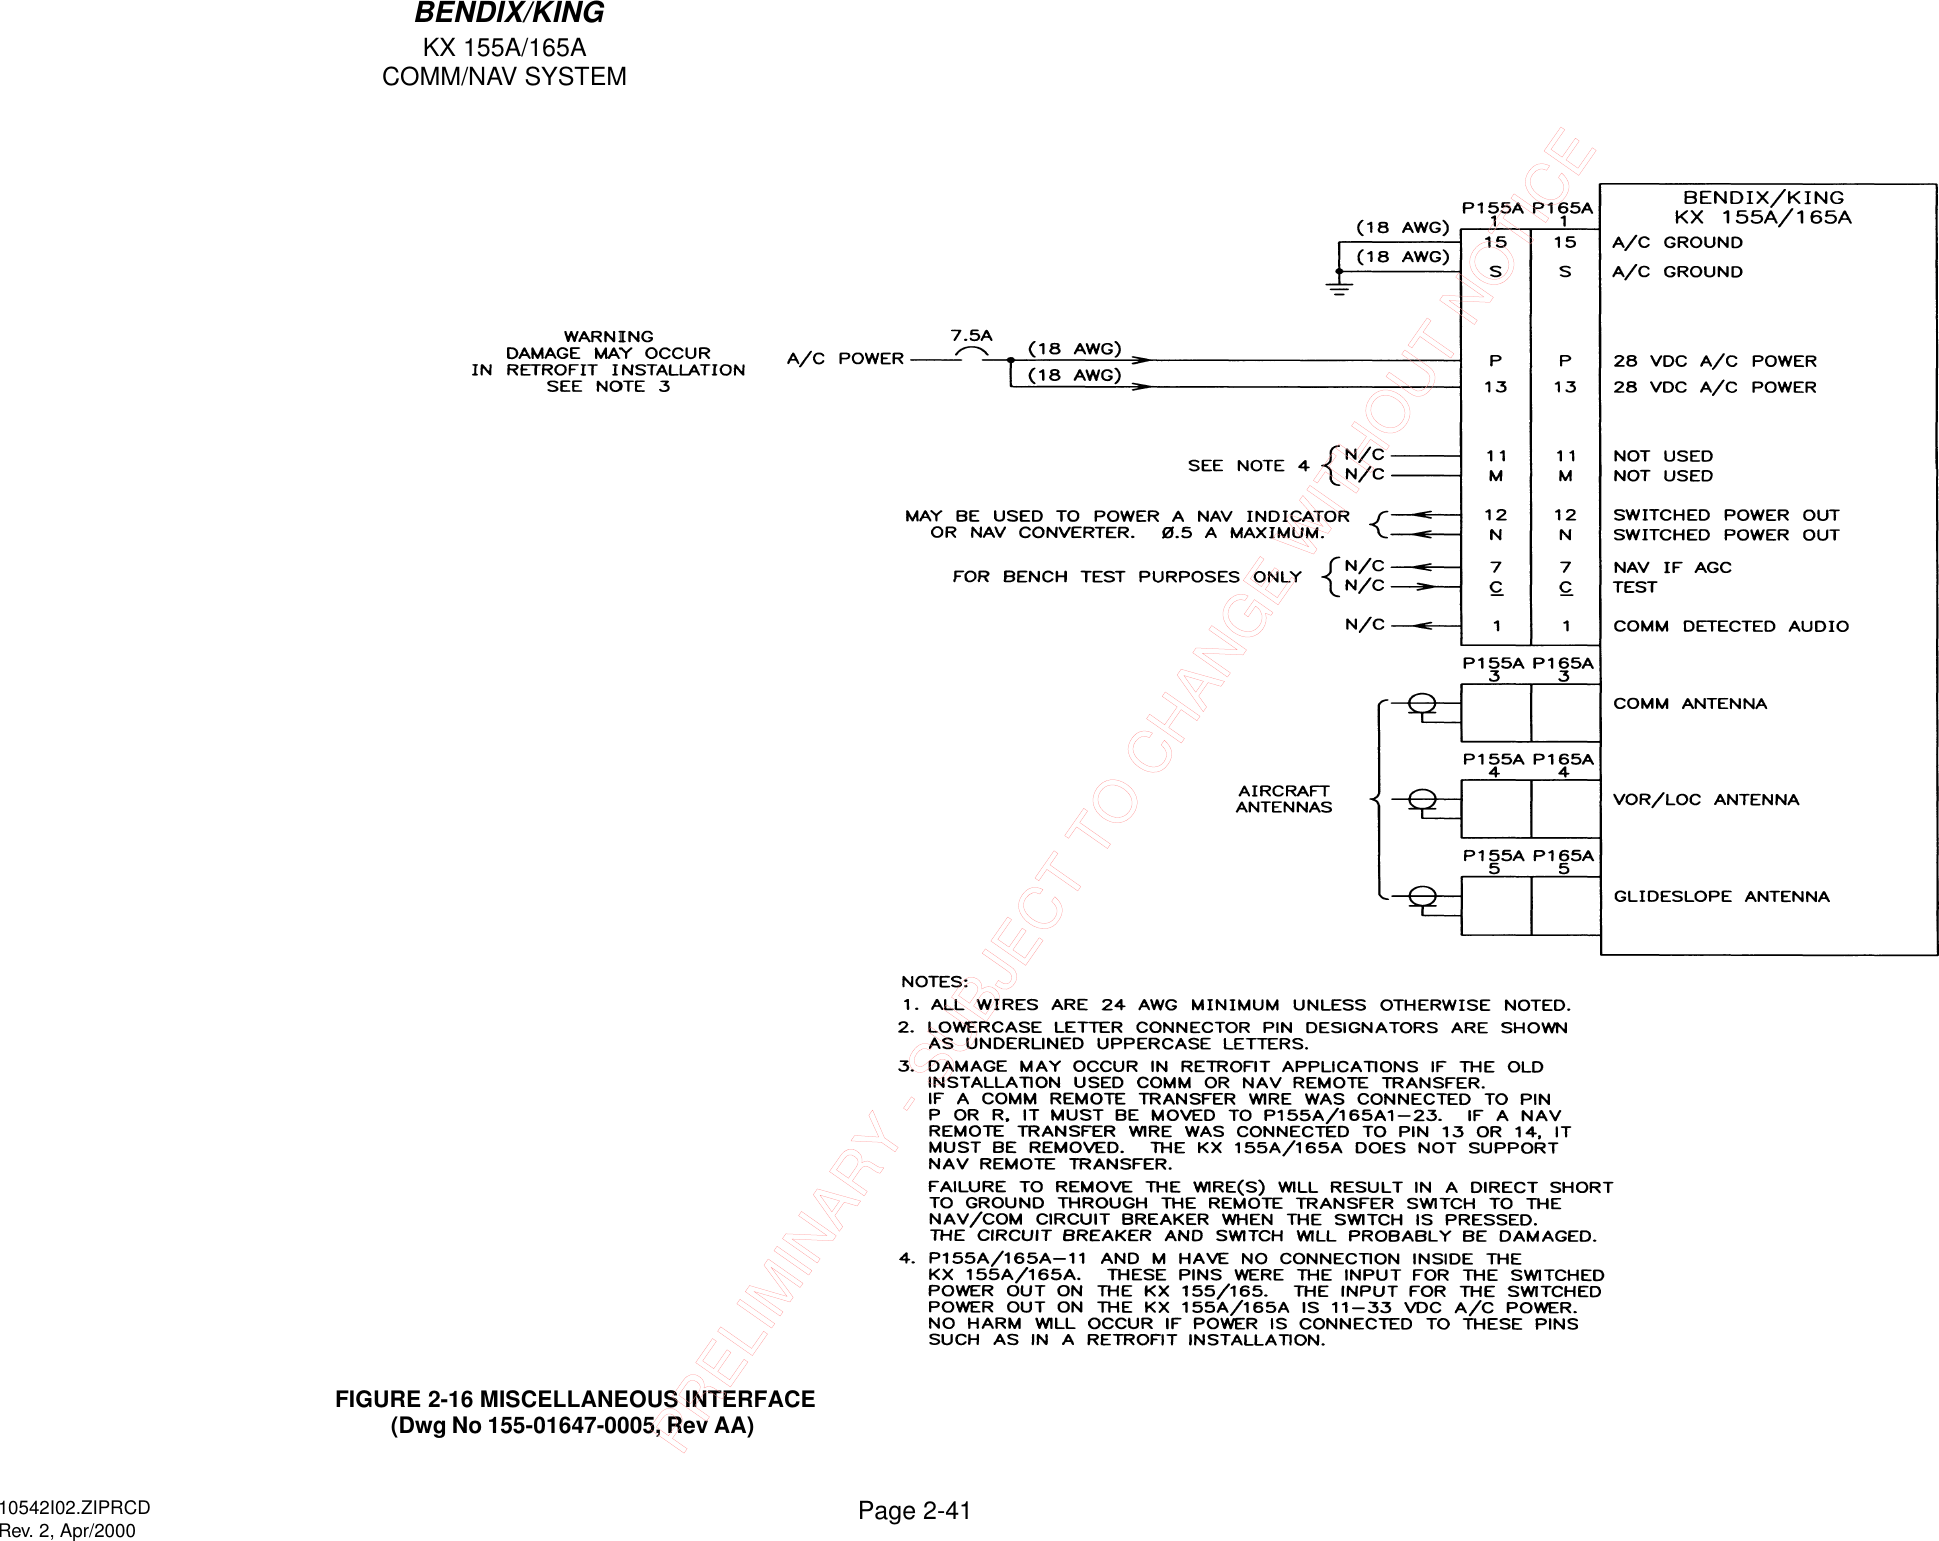 KX 155A/165ACOMM/NAV SYSTEMPage 2-41BENDIX/KING10542I02.ZIPRCDRev. 2, Apr/2000FIGURE 2-16 MISCELLANEOUS INTERFACE(Dwg No 155-01647-0005, Rev AA) PRELIMINARY - SUBJECT TO CHANGE WITHOUT NOTICE